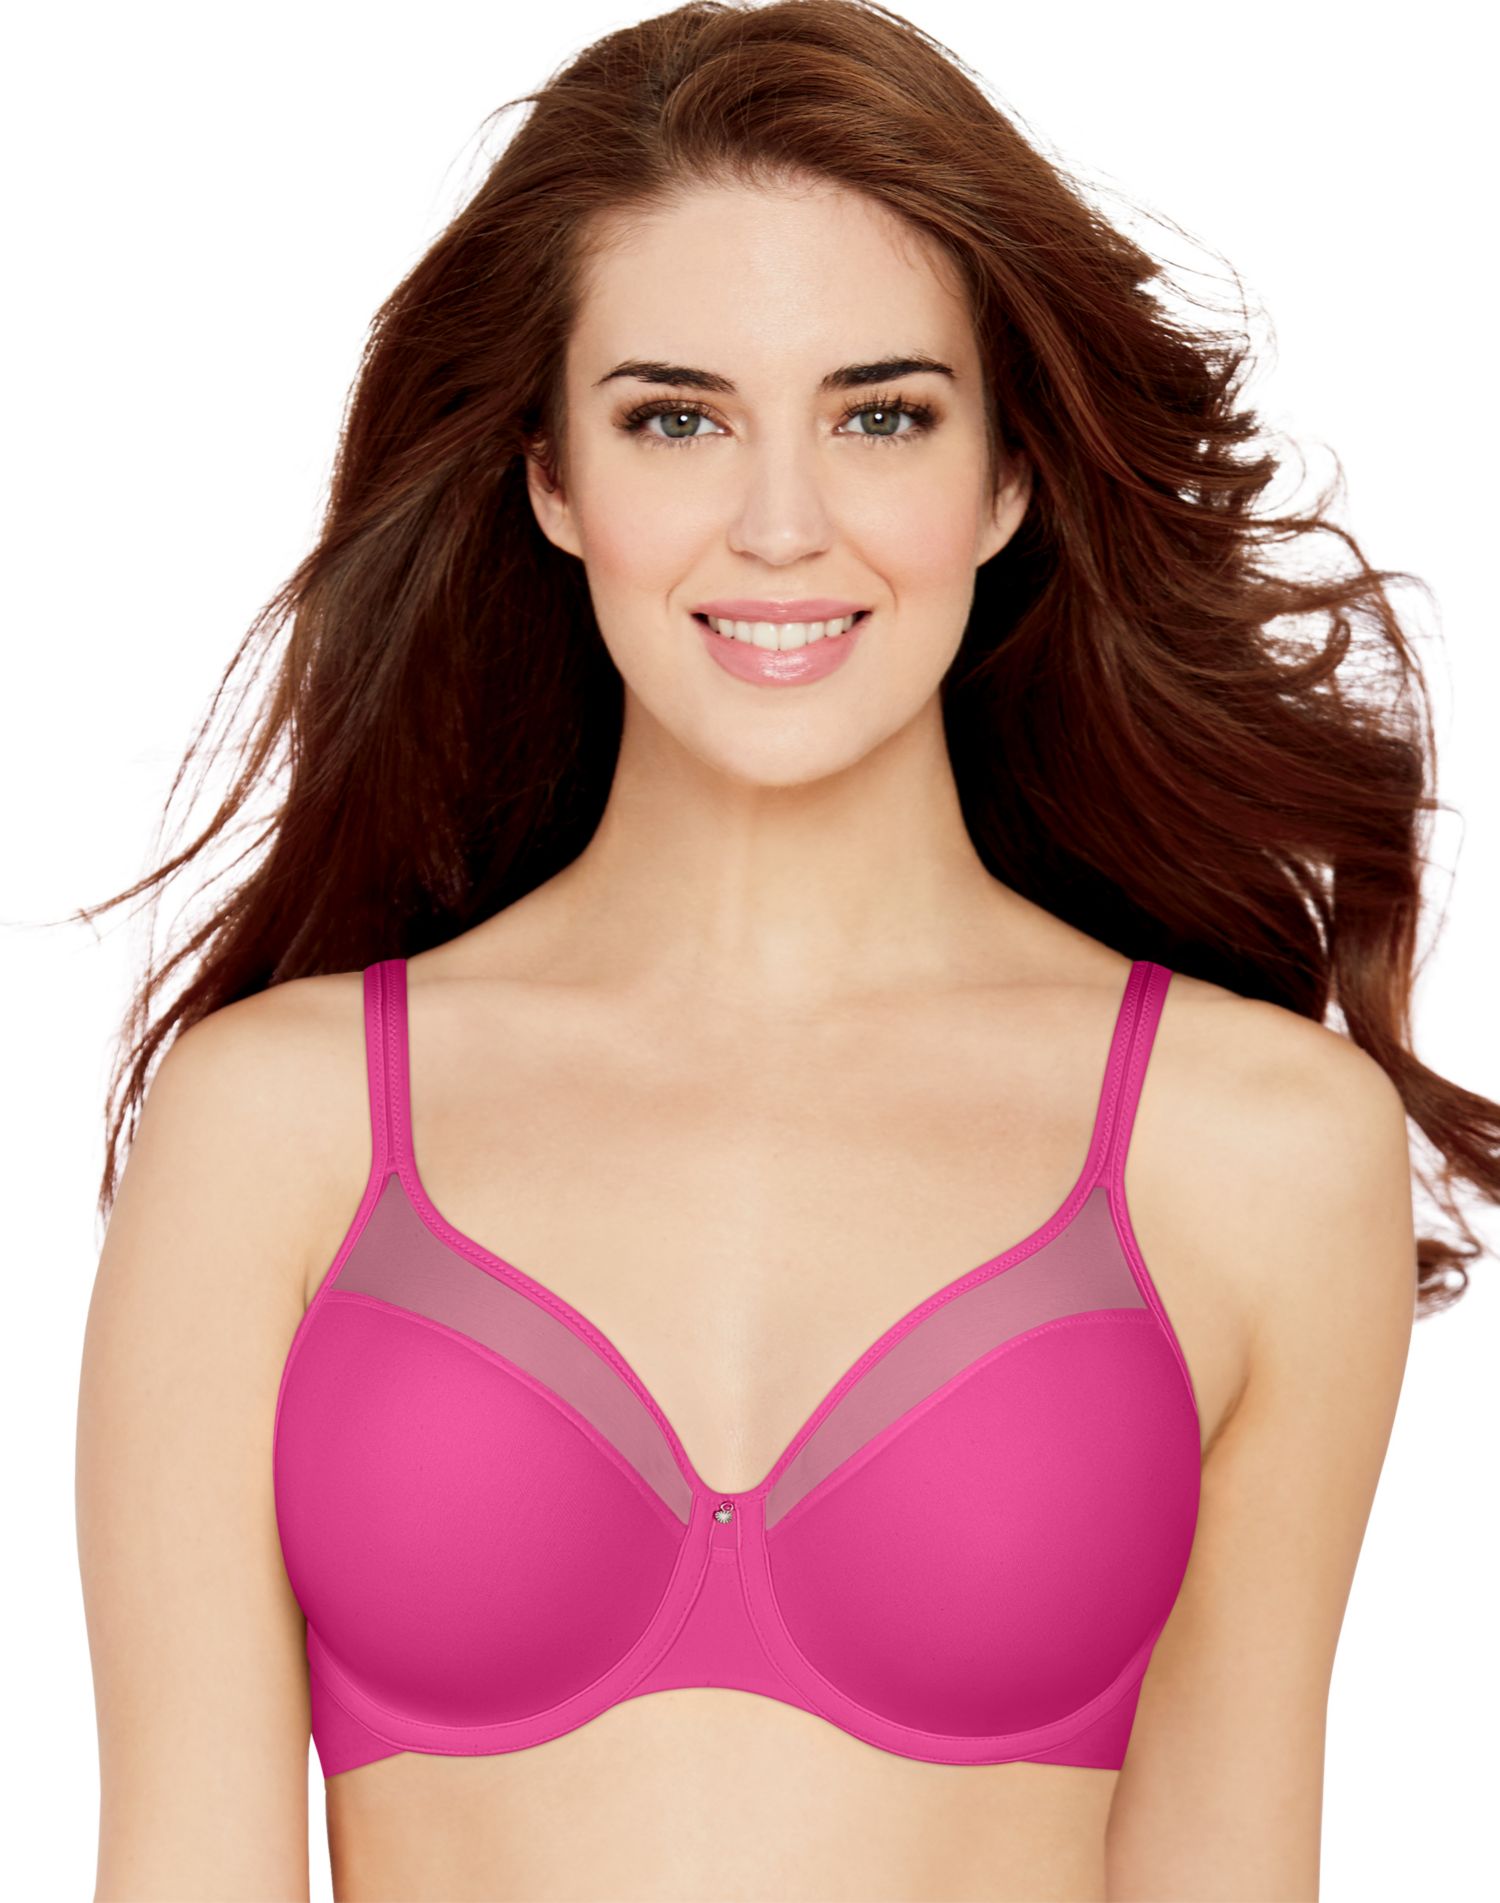 Bali One Smooth U® Ultra Light Underwire Bra (More colors available) - 3439  - Light Beige